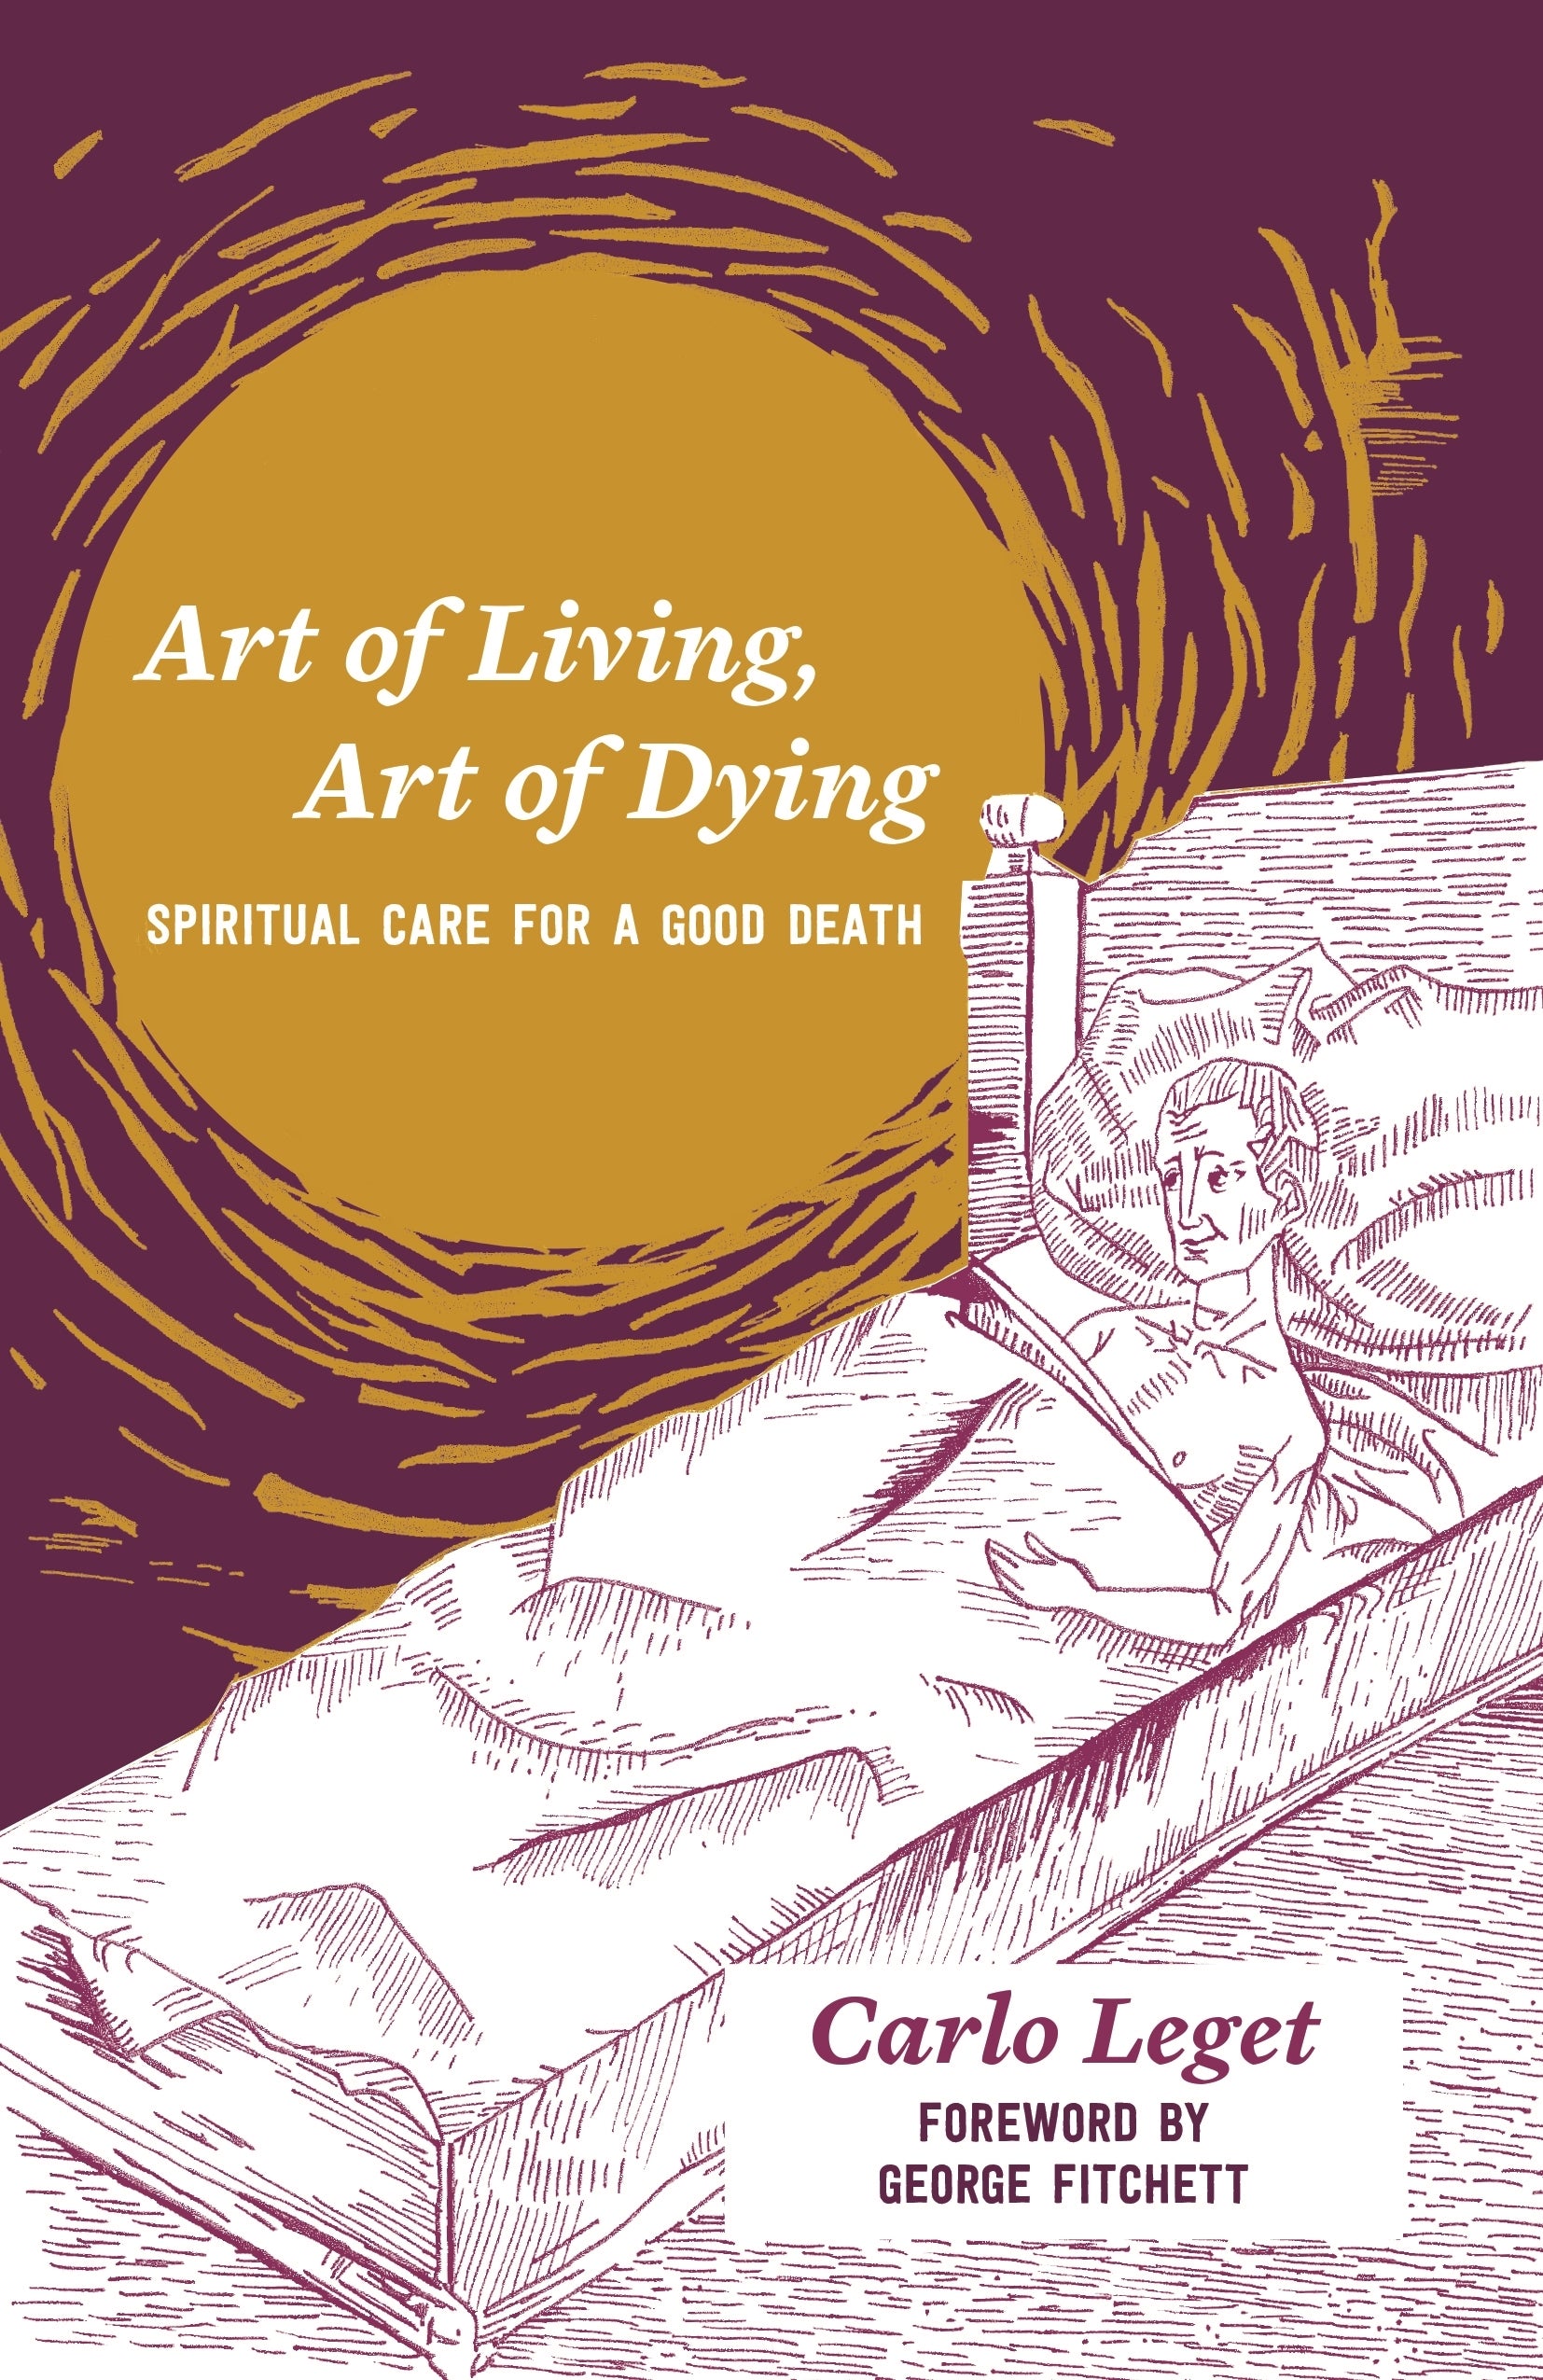 Art of Living, Art of Dying by Carlo Leget, George Fitchett